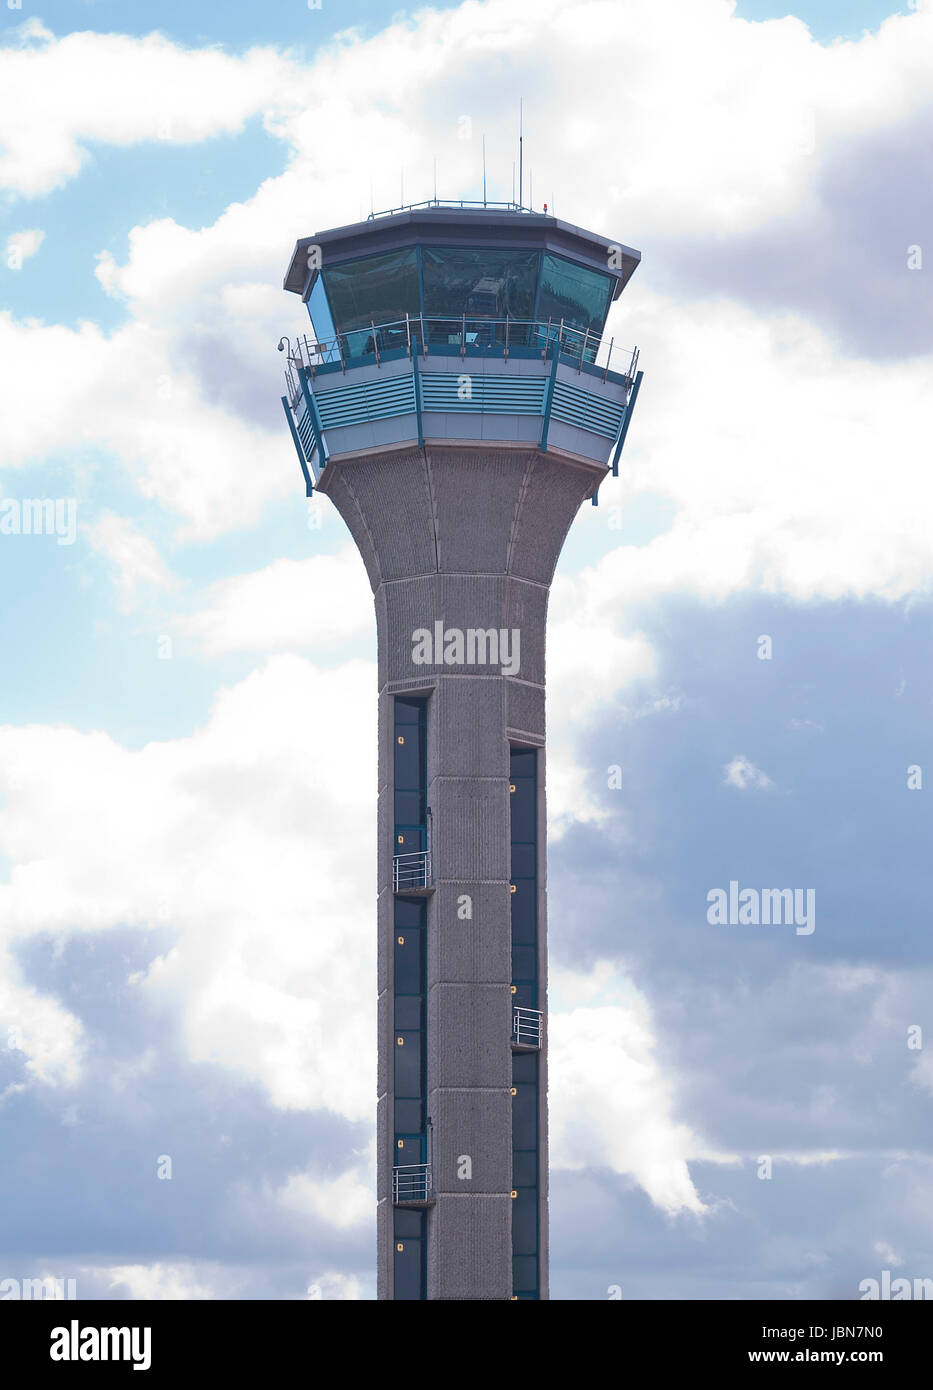 Air traffic control tower, London Luton airport. Stock Photo